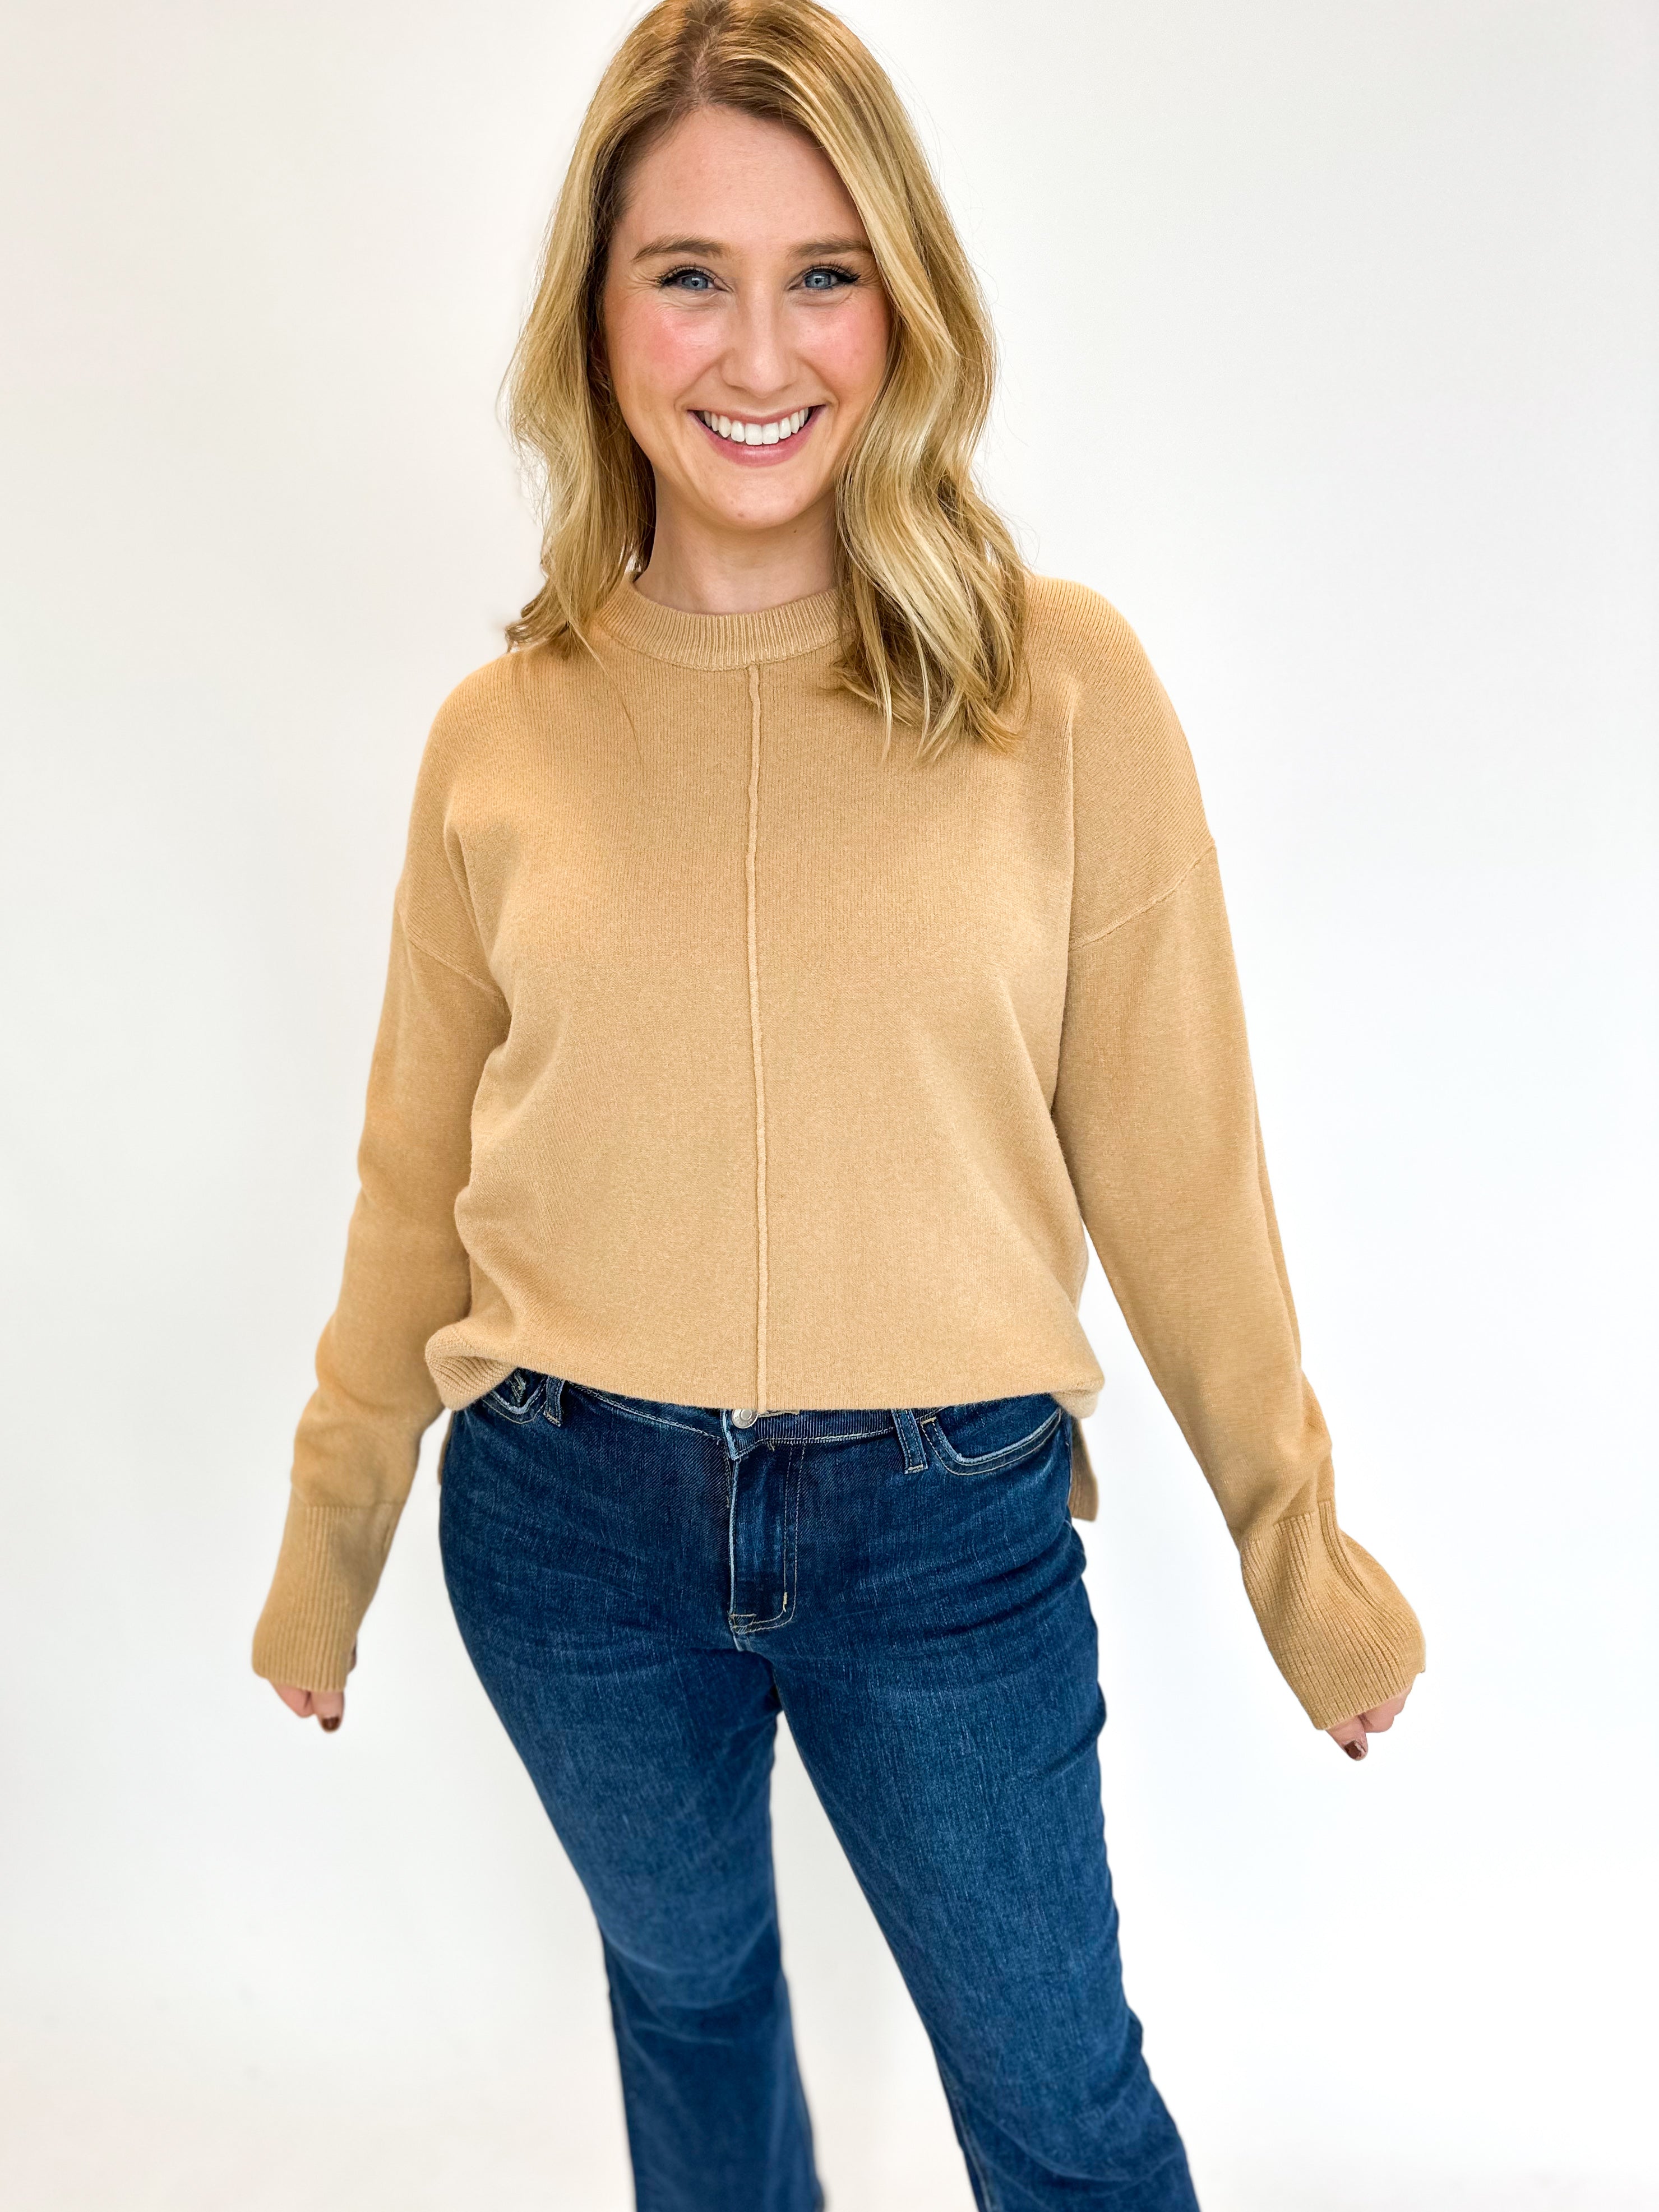 Cozy Days Lightweight Sweater Top - Taupe-230 Sweaters/Cardis-&MERCI-July & June Women's Fashion Boutique Located in San Antonio, Texas